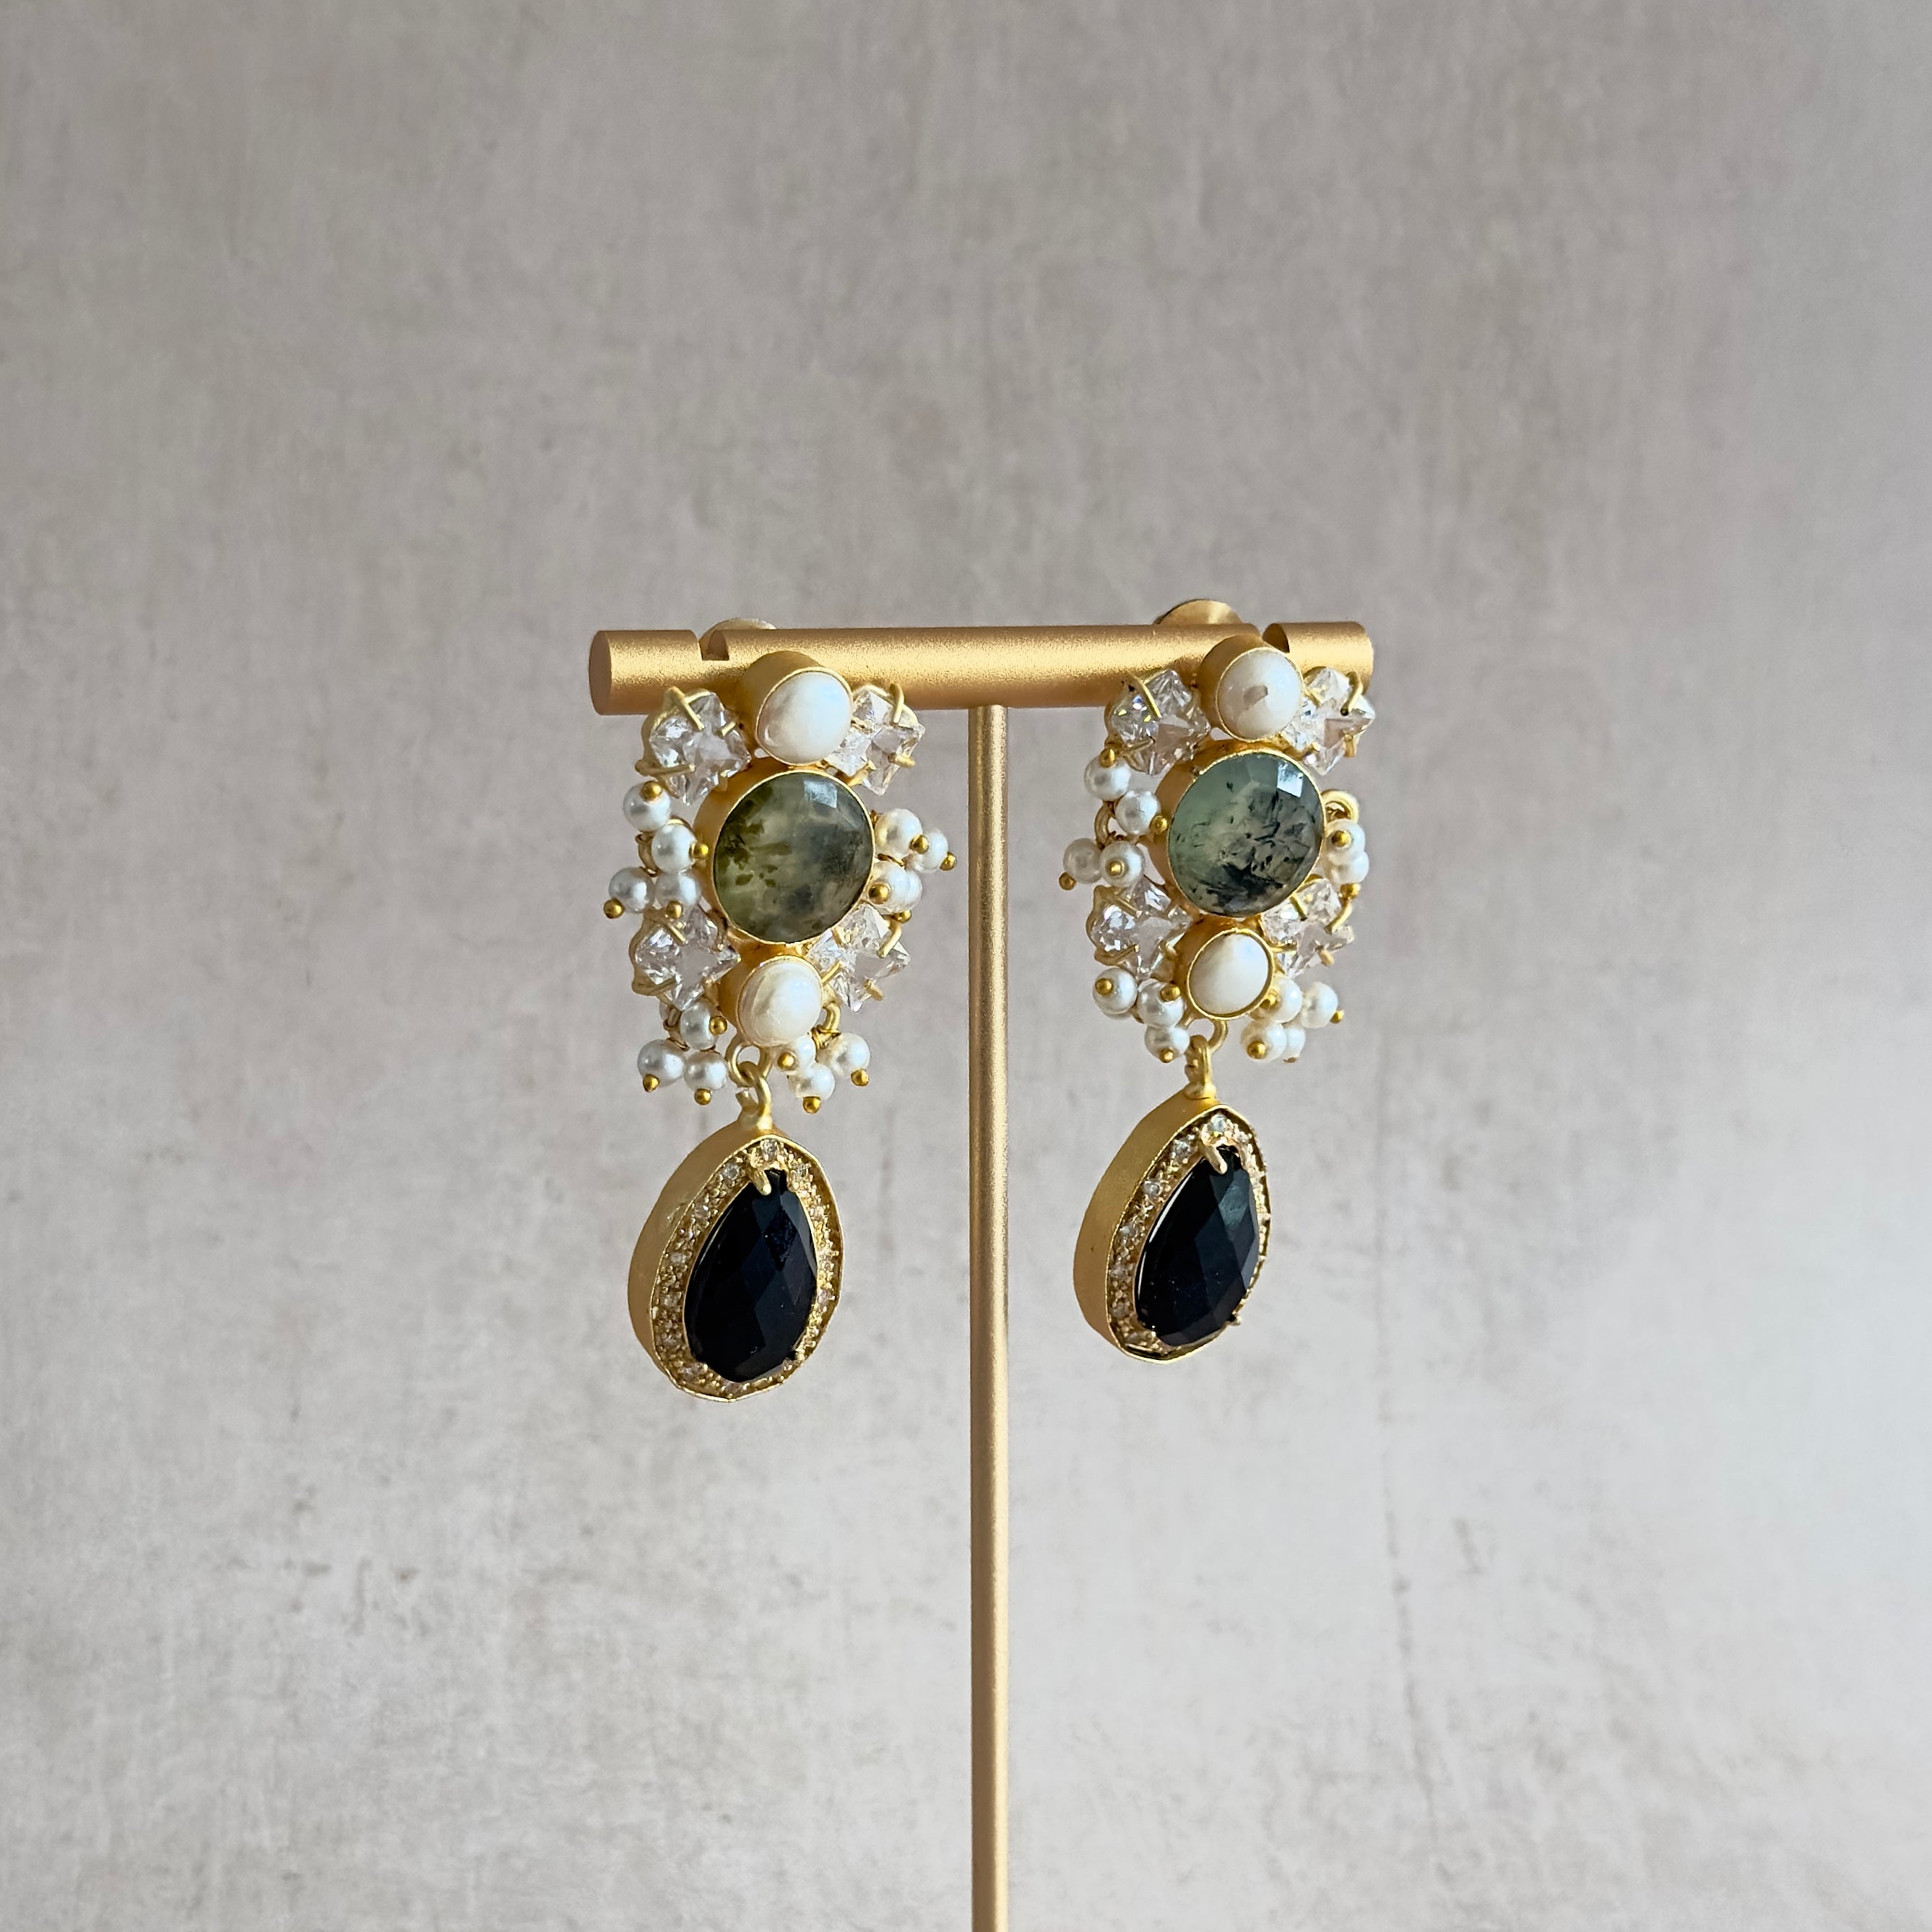 Add a touch of elegance to any outfit with our Lela Black Pearl Earrings! These stunning multi gemstone earrings feature sparkling CZ crystals, bringing a touch of glamour and sophistication to your look. Perfect for any occasion, these earrings are sure to make a statement and elevate your style.